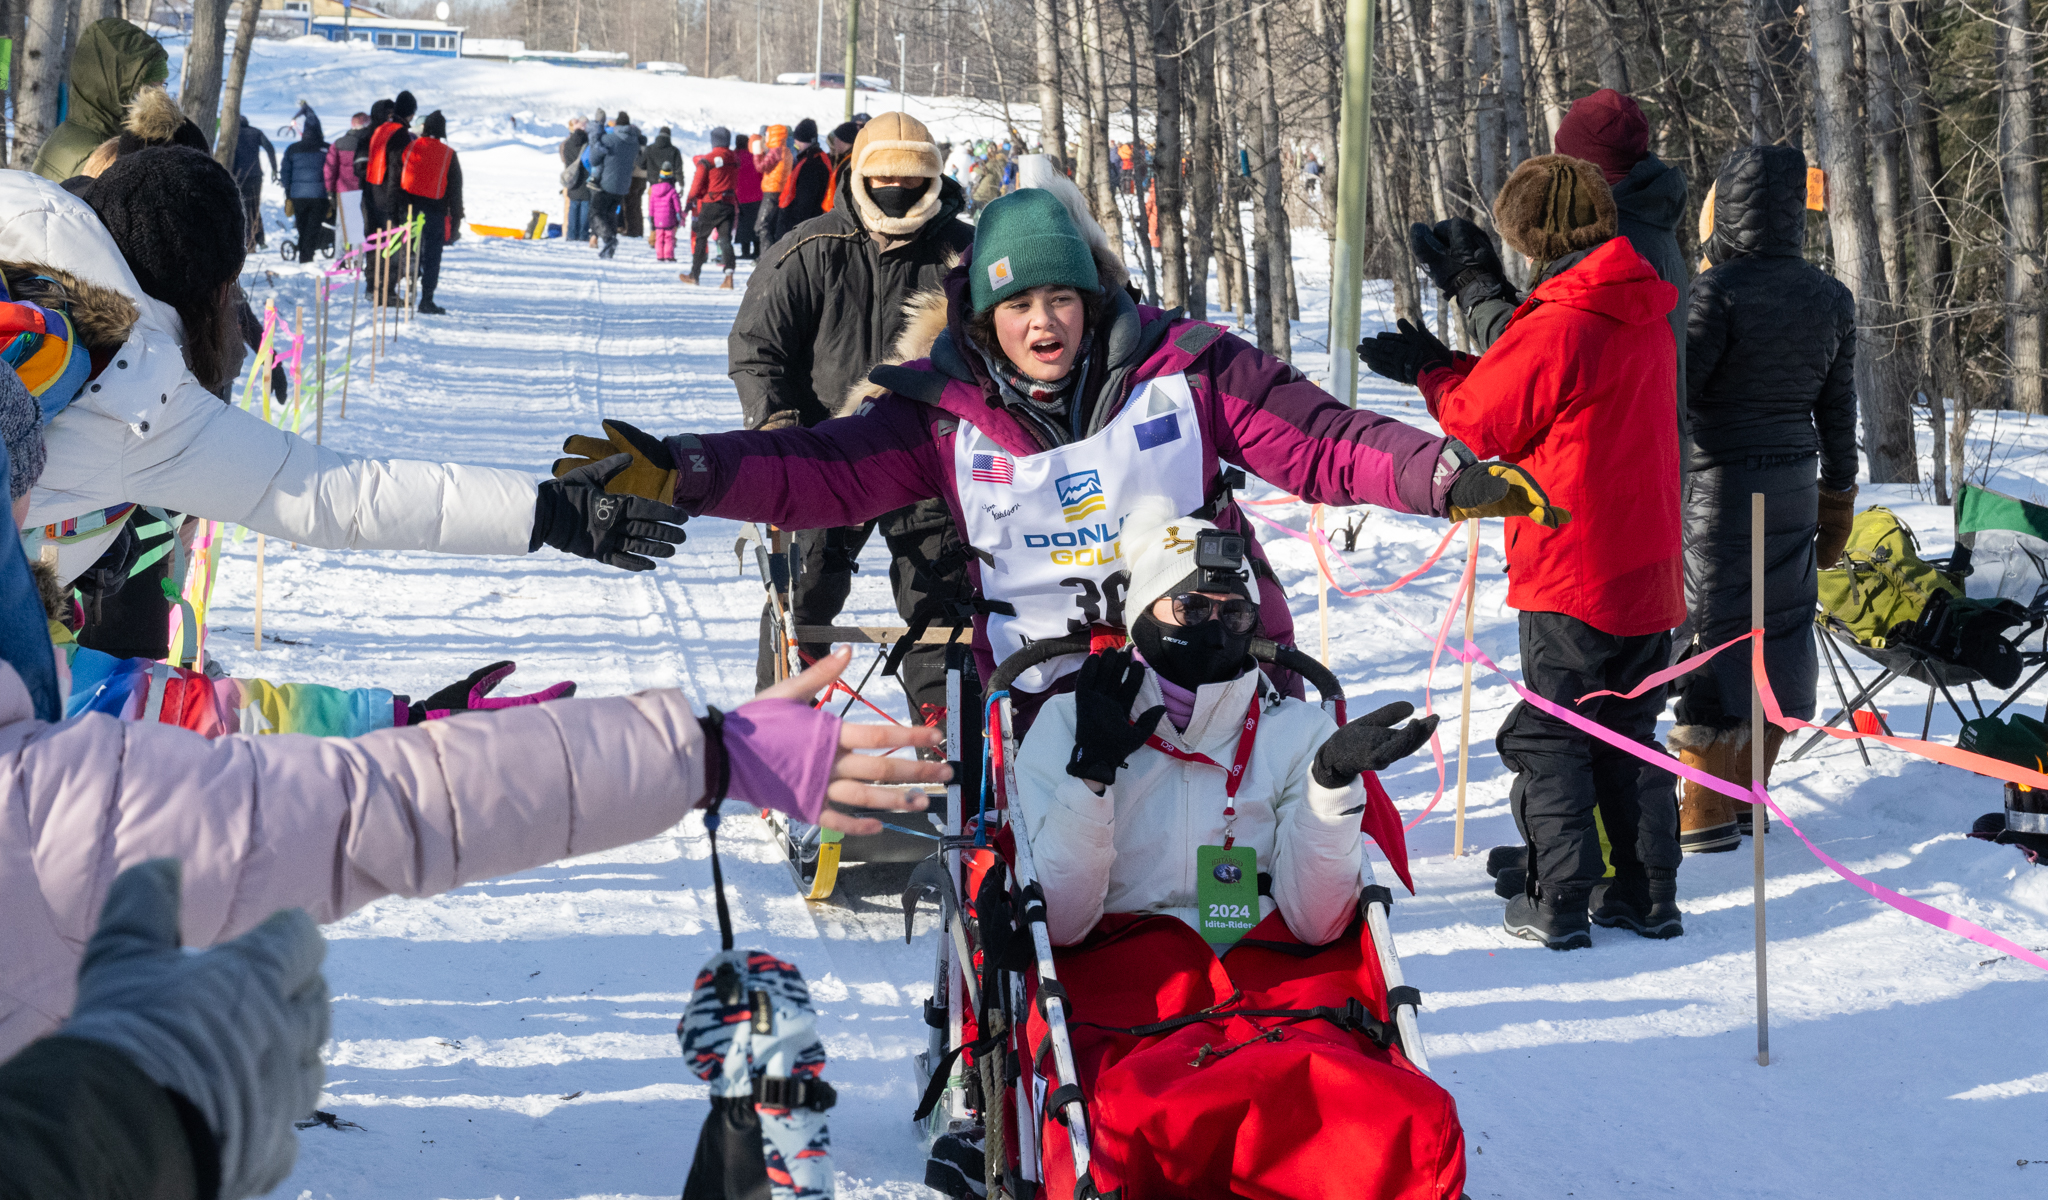 A woman in a purple winter coat gives hi-fives while riding on a dog sled